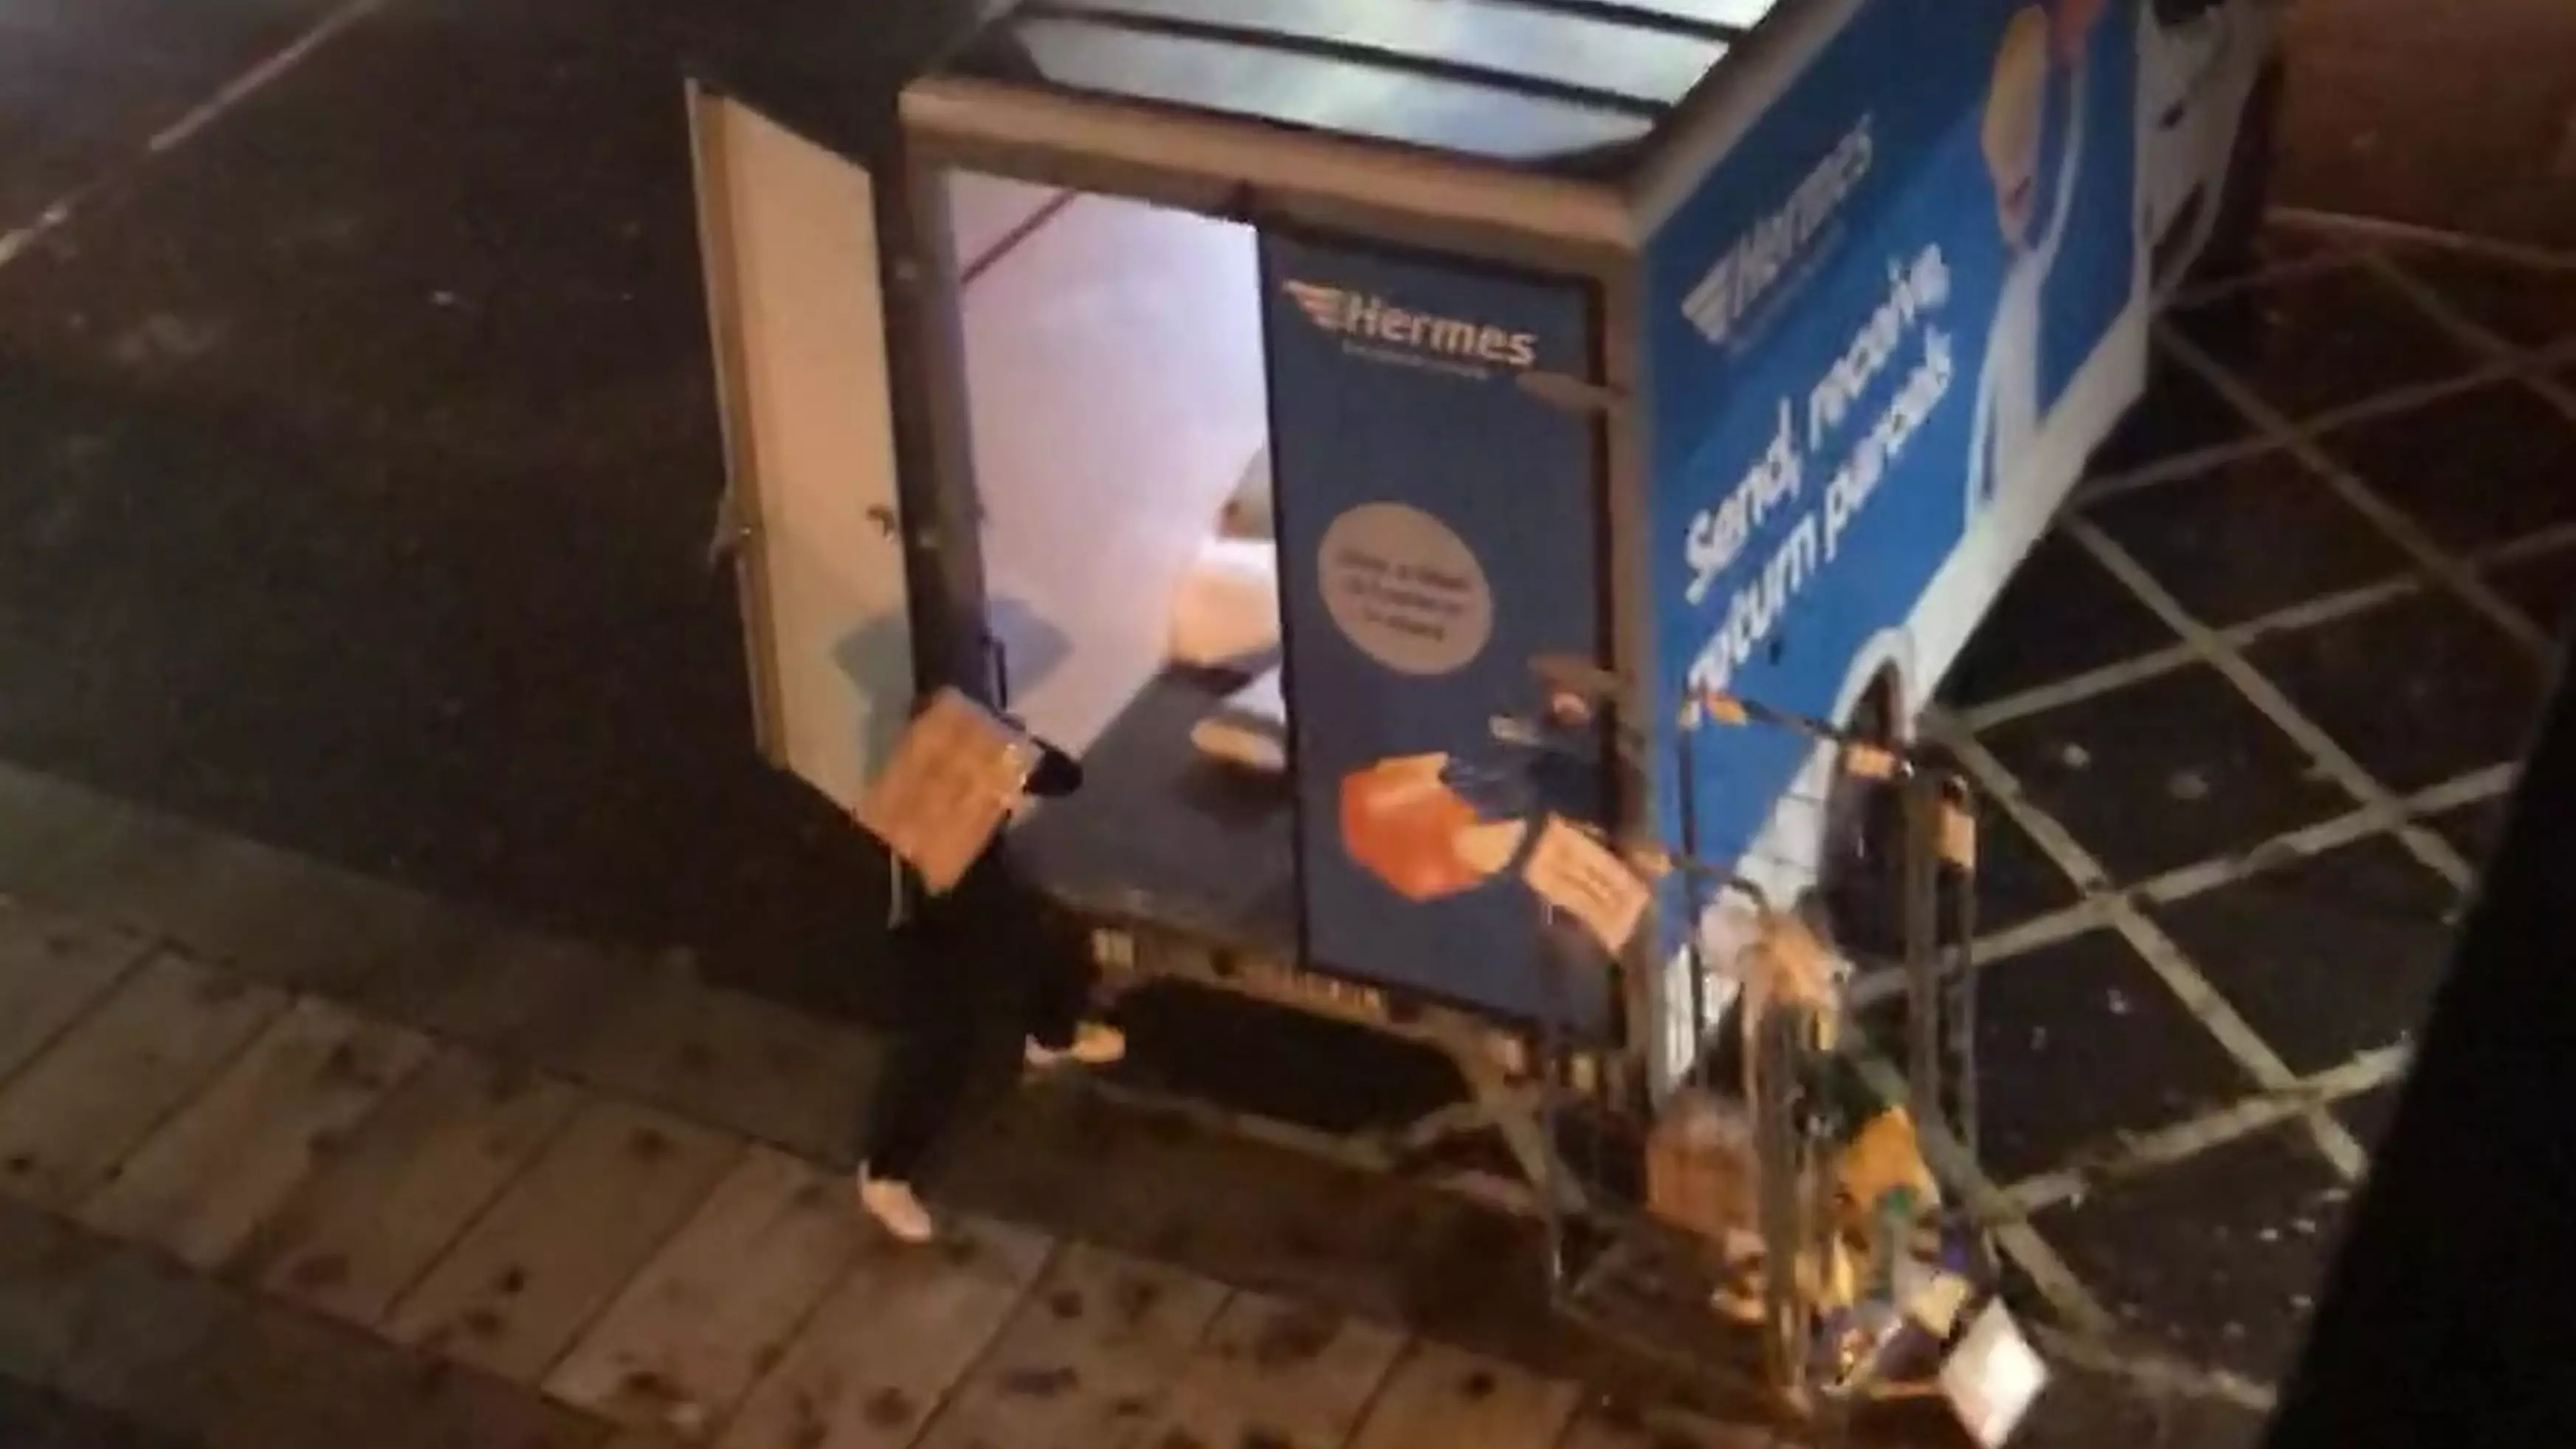 Man Films 'Angry' Hermes Driver Lashing Parcels Into Van 